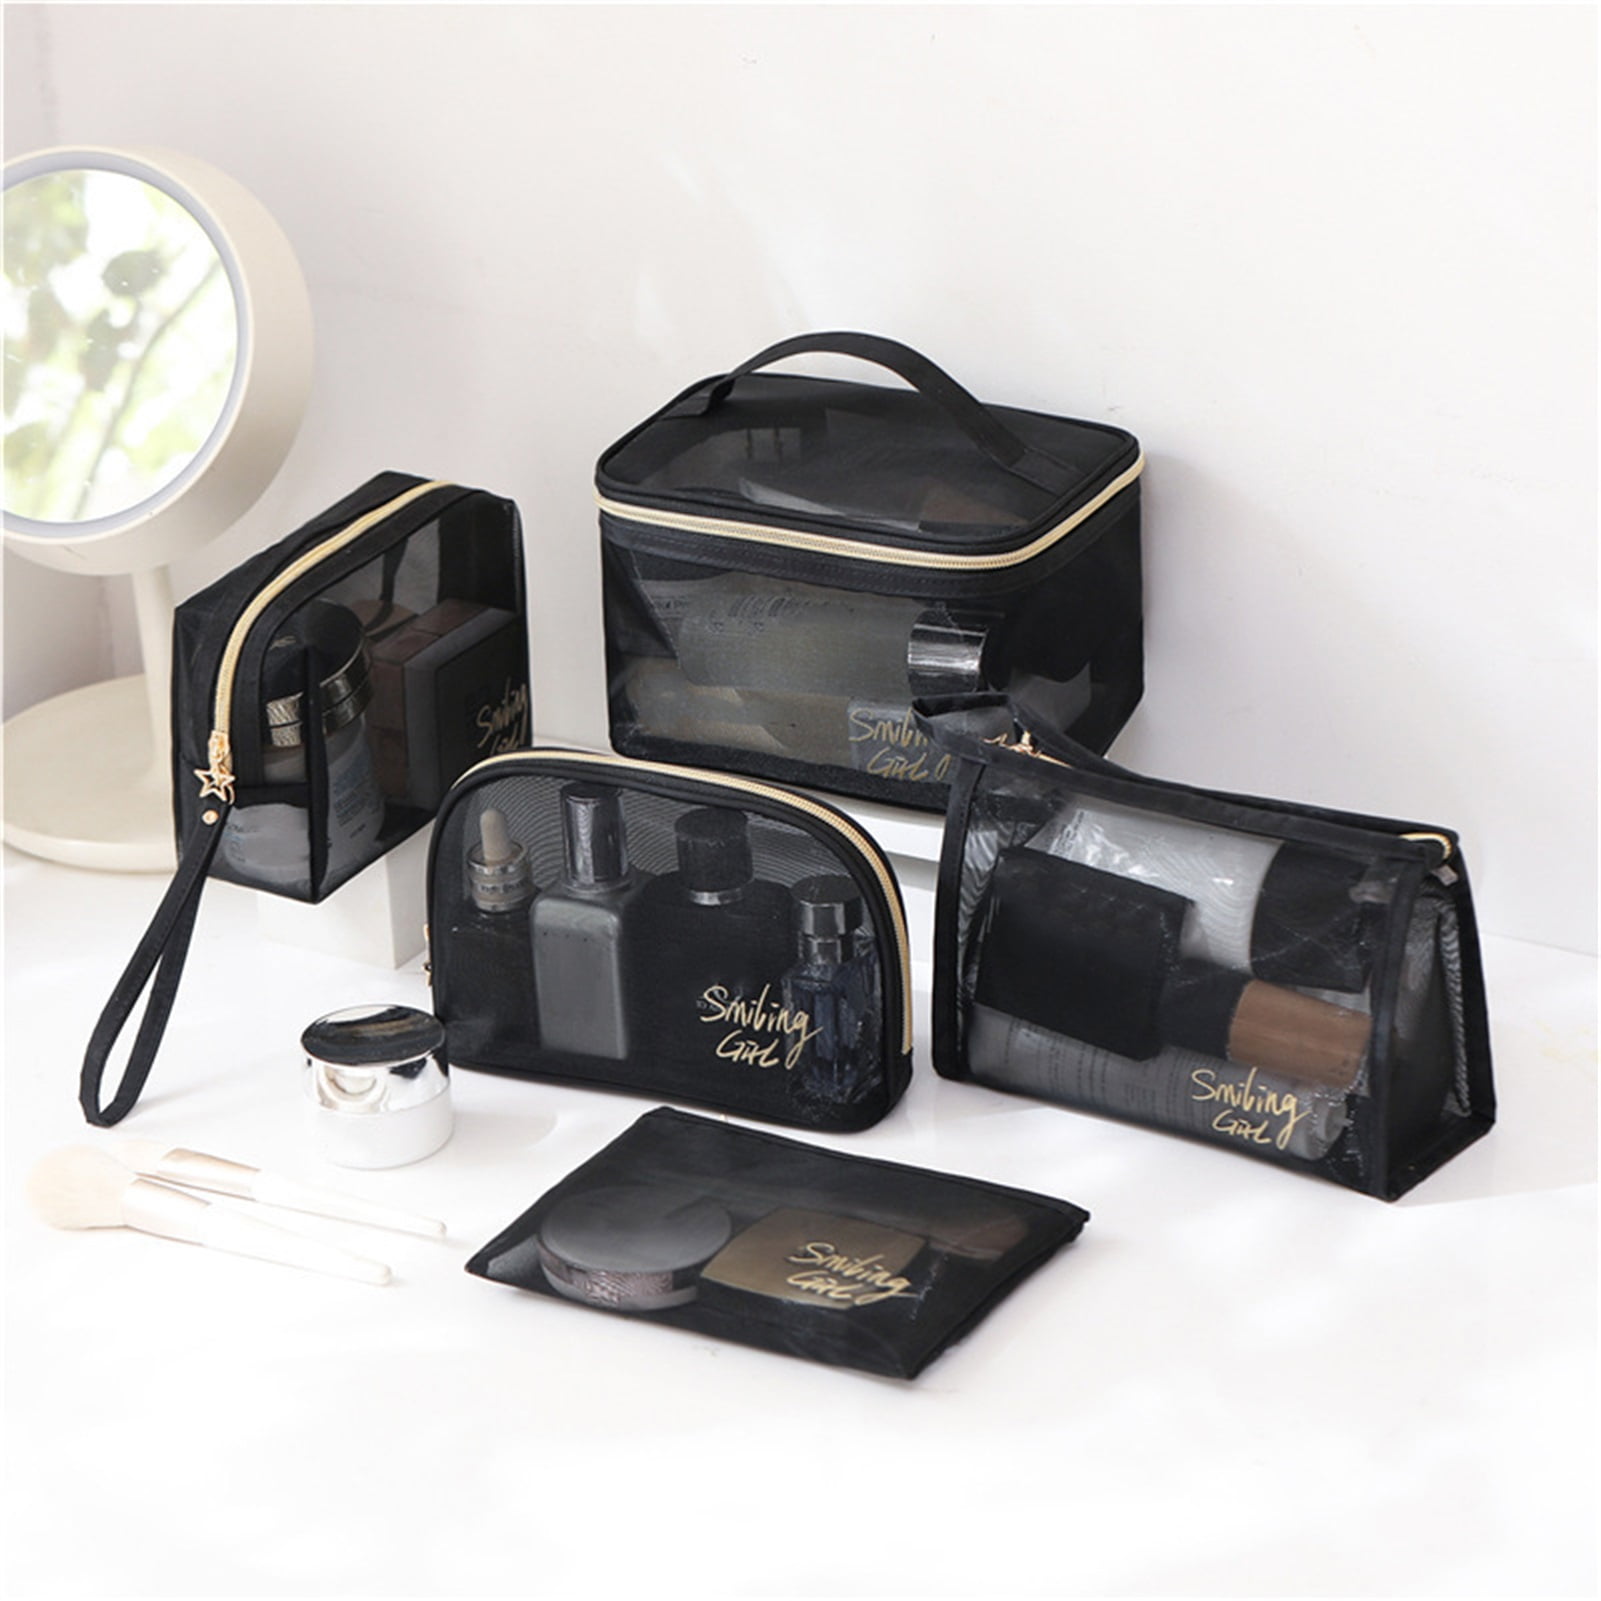 Buy Victoria's Secret 4 in 1 Cosmetic Bag from the Victoria's